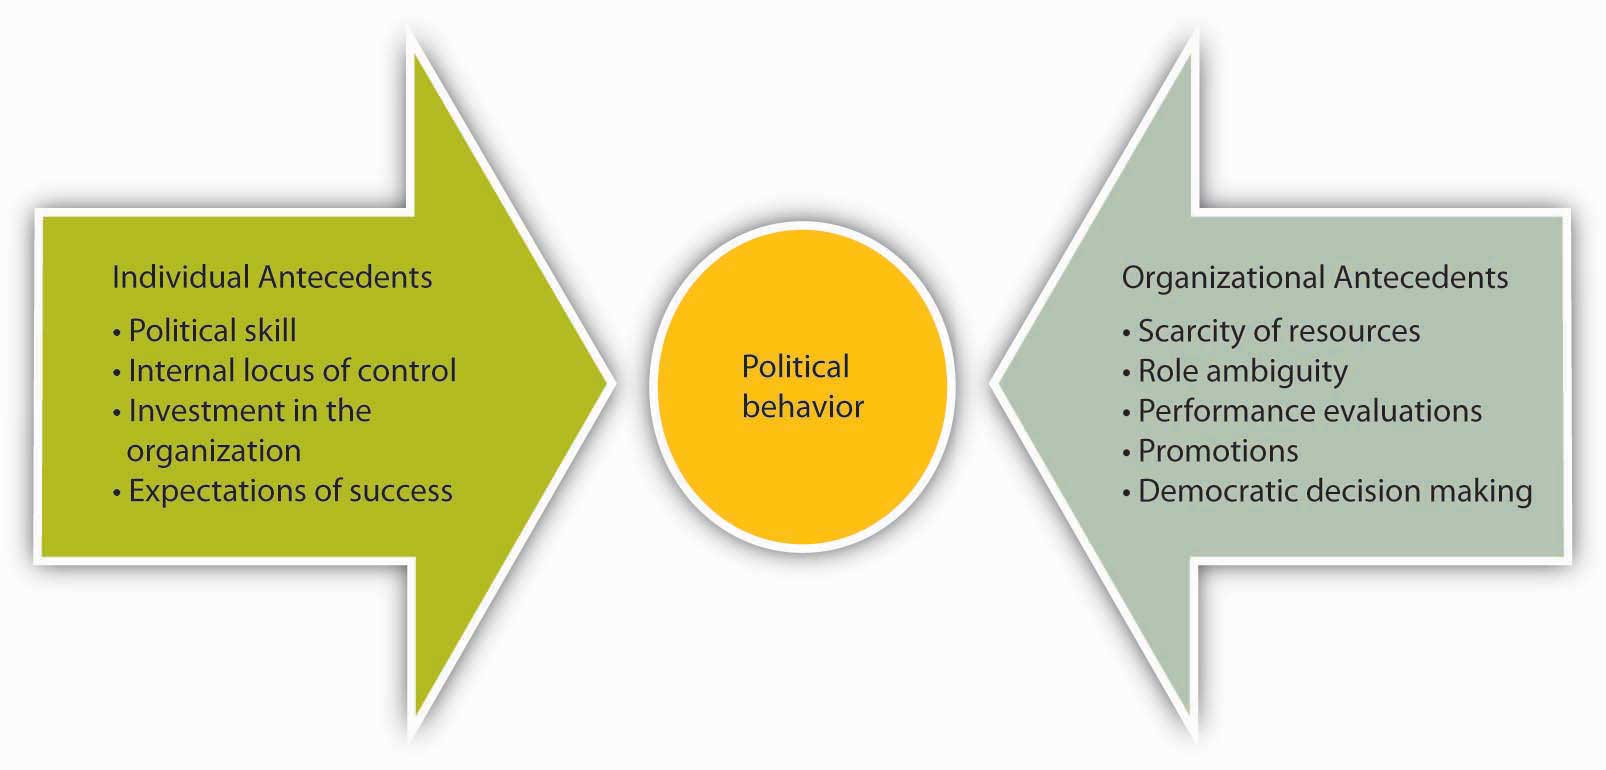 Individual and organizational antecedents can both lead to political behavior